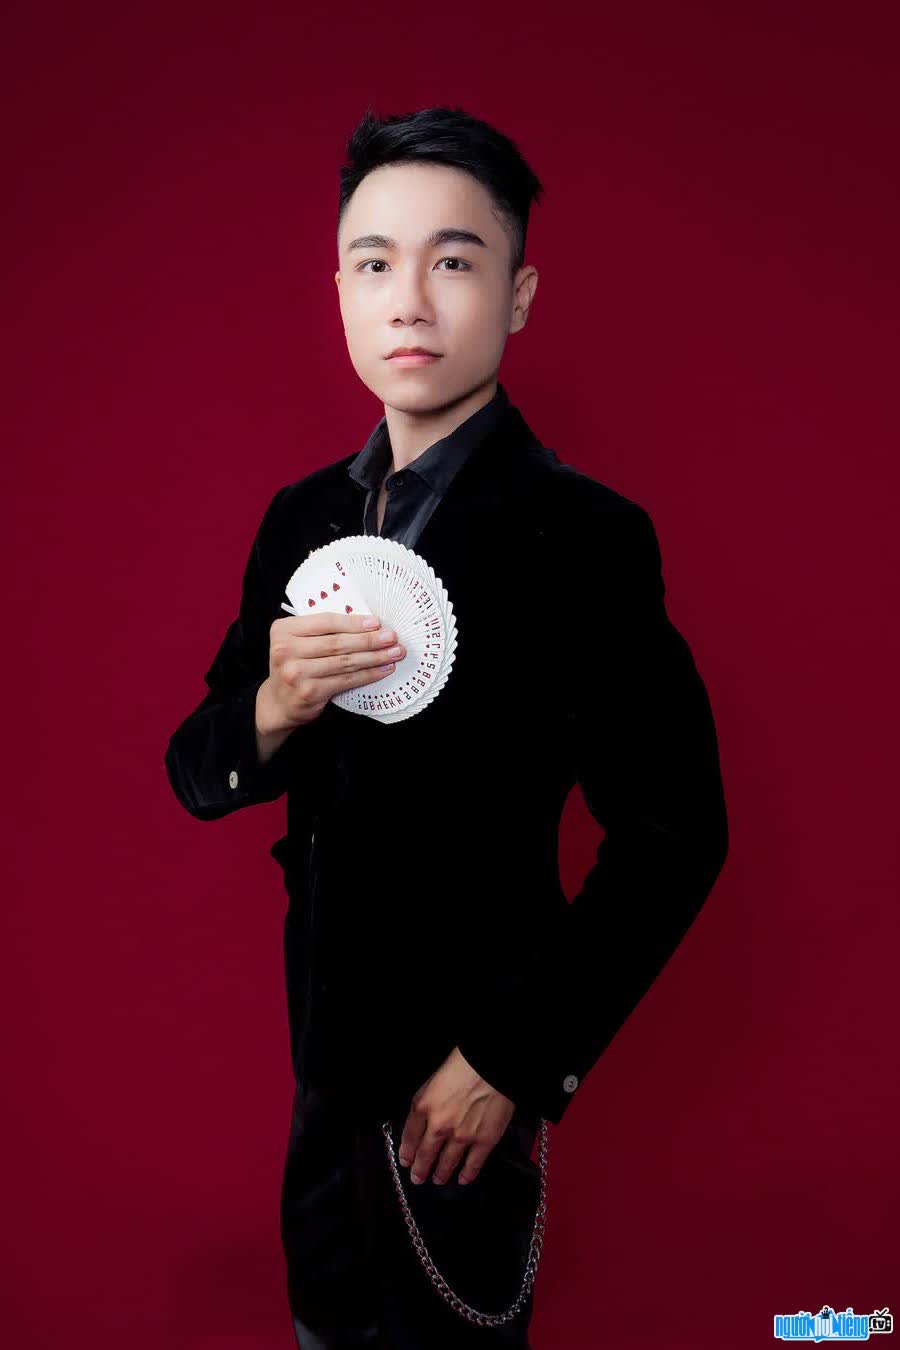 Magician Doan Duc Trung owns a Youtube channel with more than 40